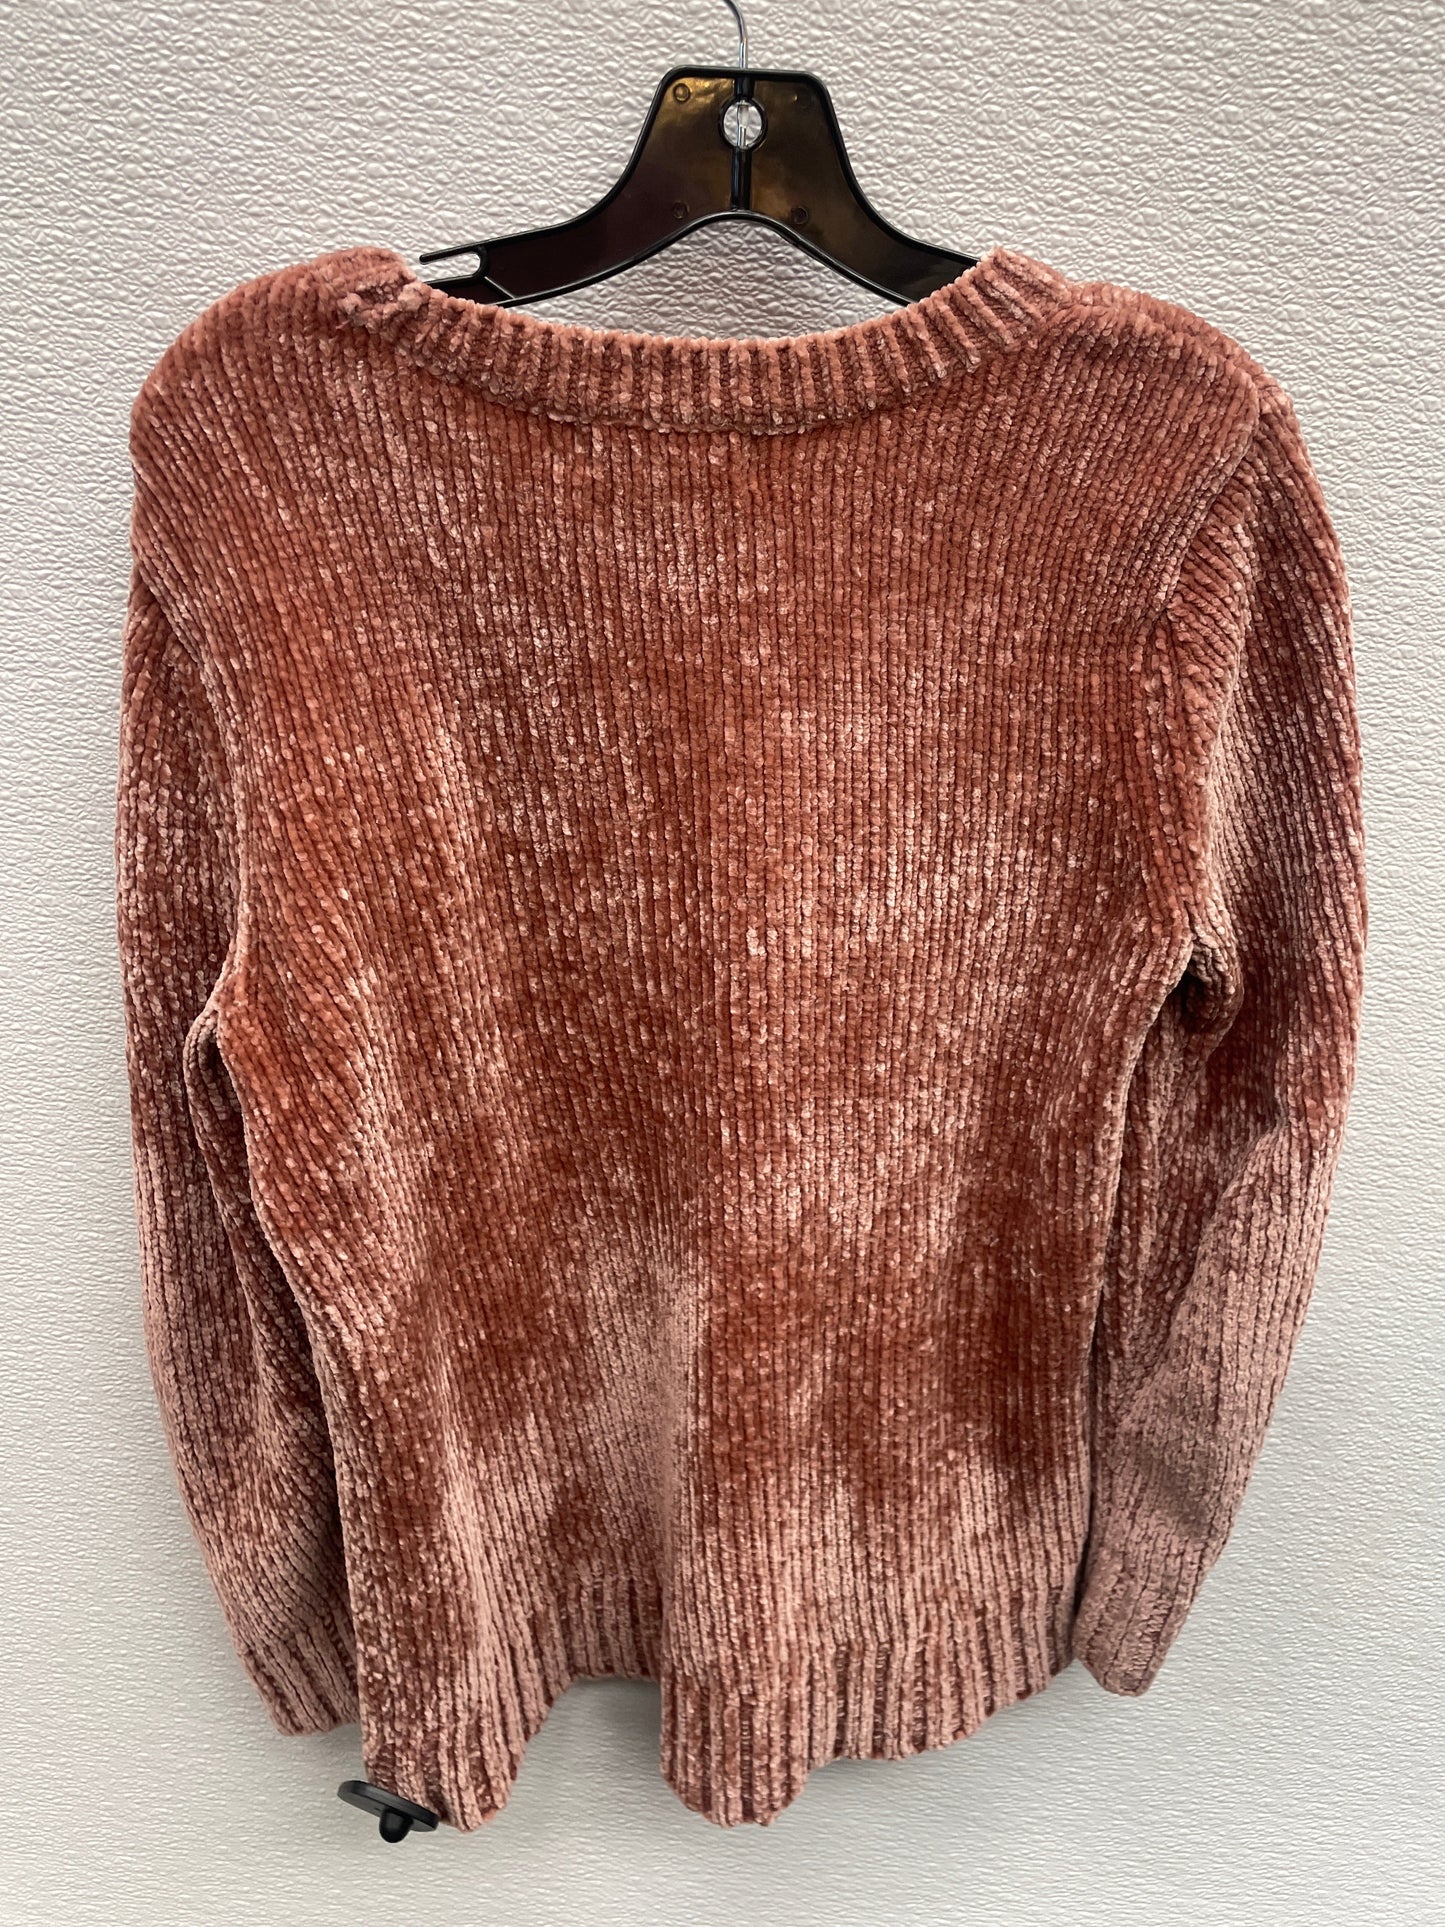 Sweater By Orvis  Size: M